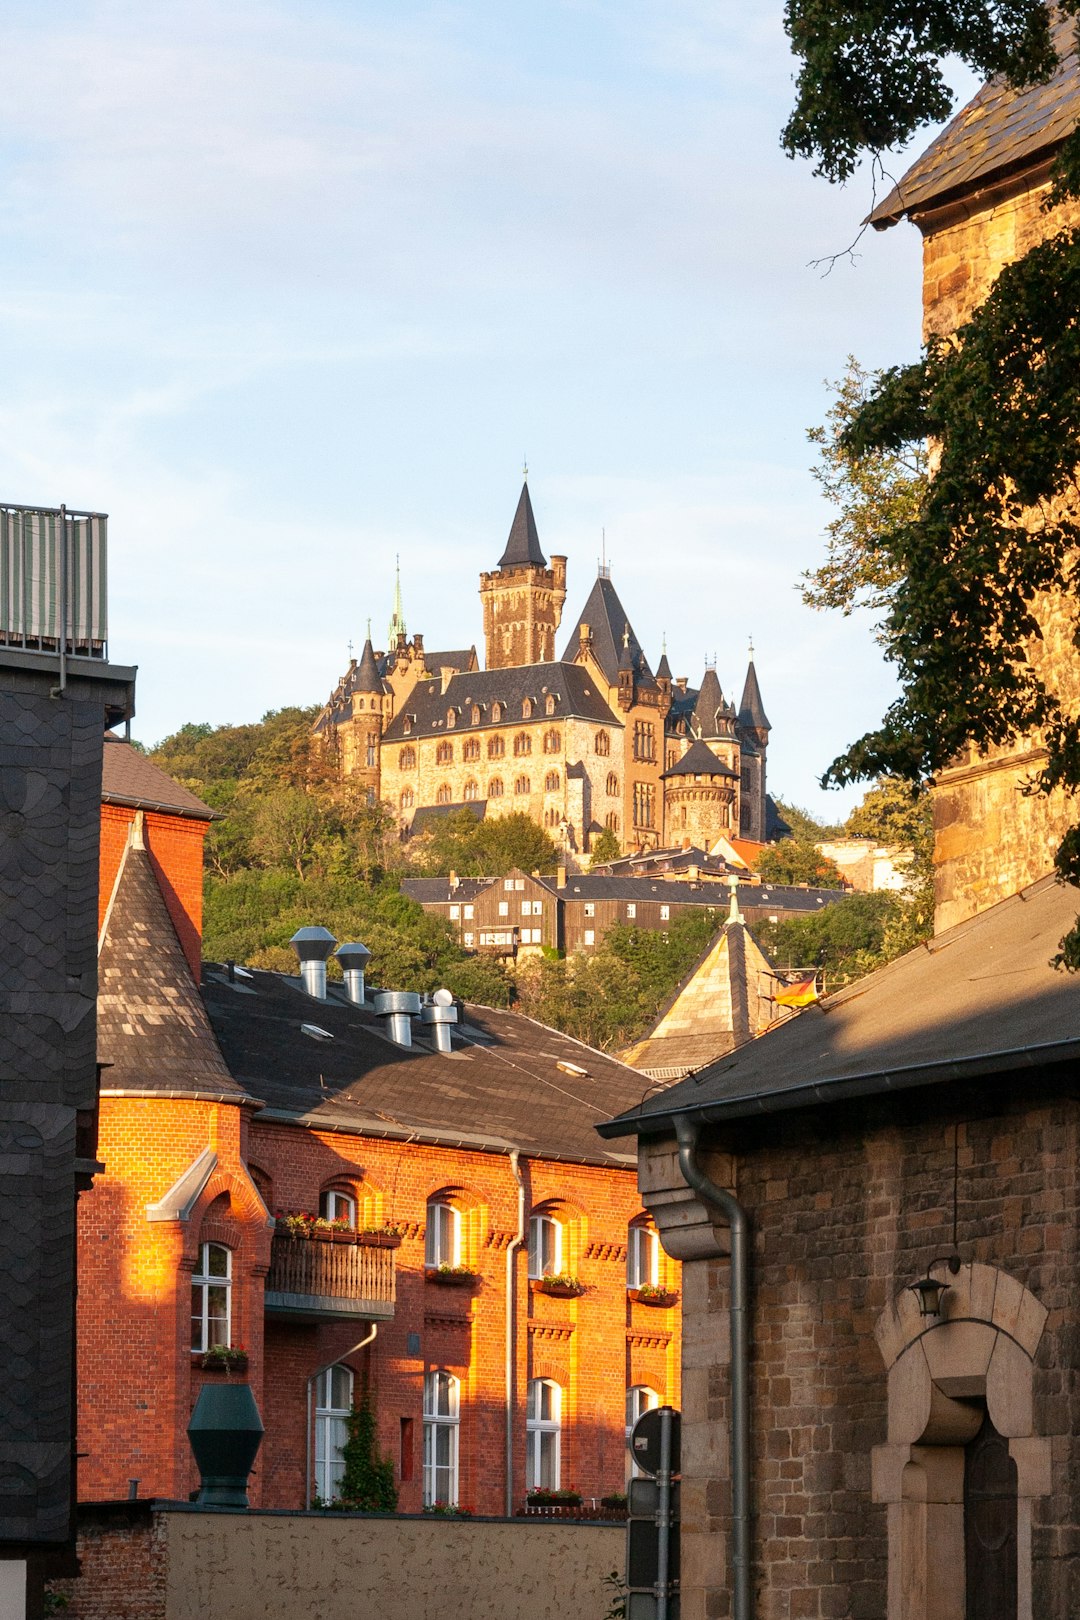 Travel Tips and Stories of Wernigerode Castle in Germany